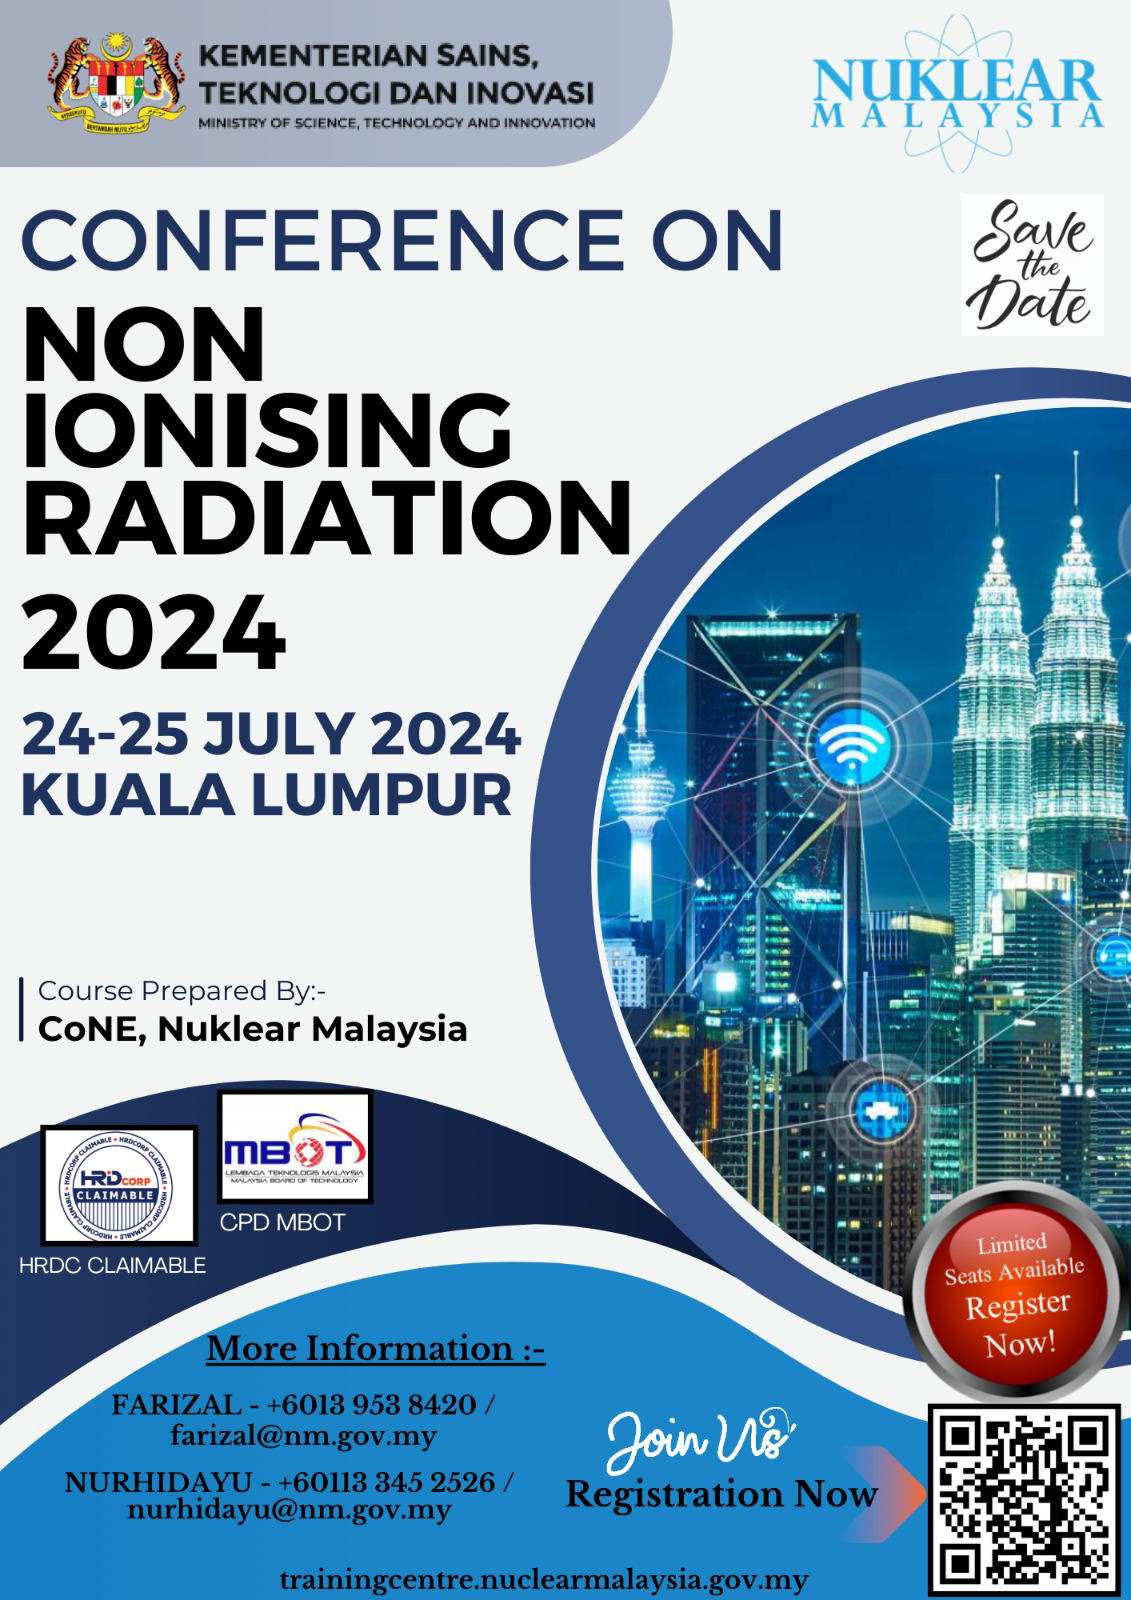 INTERNATIONAL CONFERENCE ON NON-IONISING RADIATION 2024